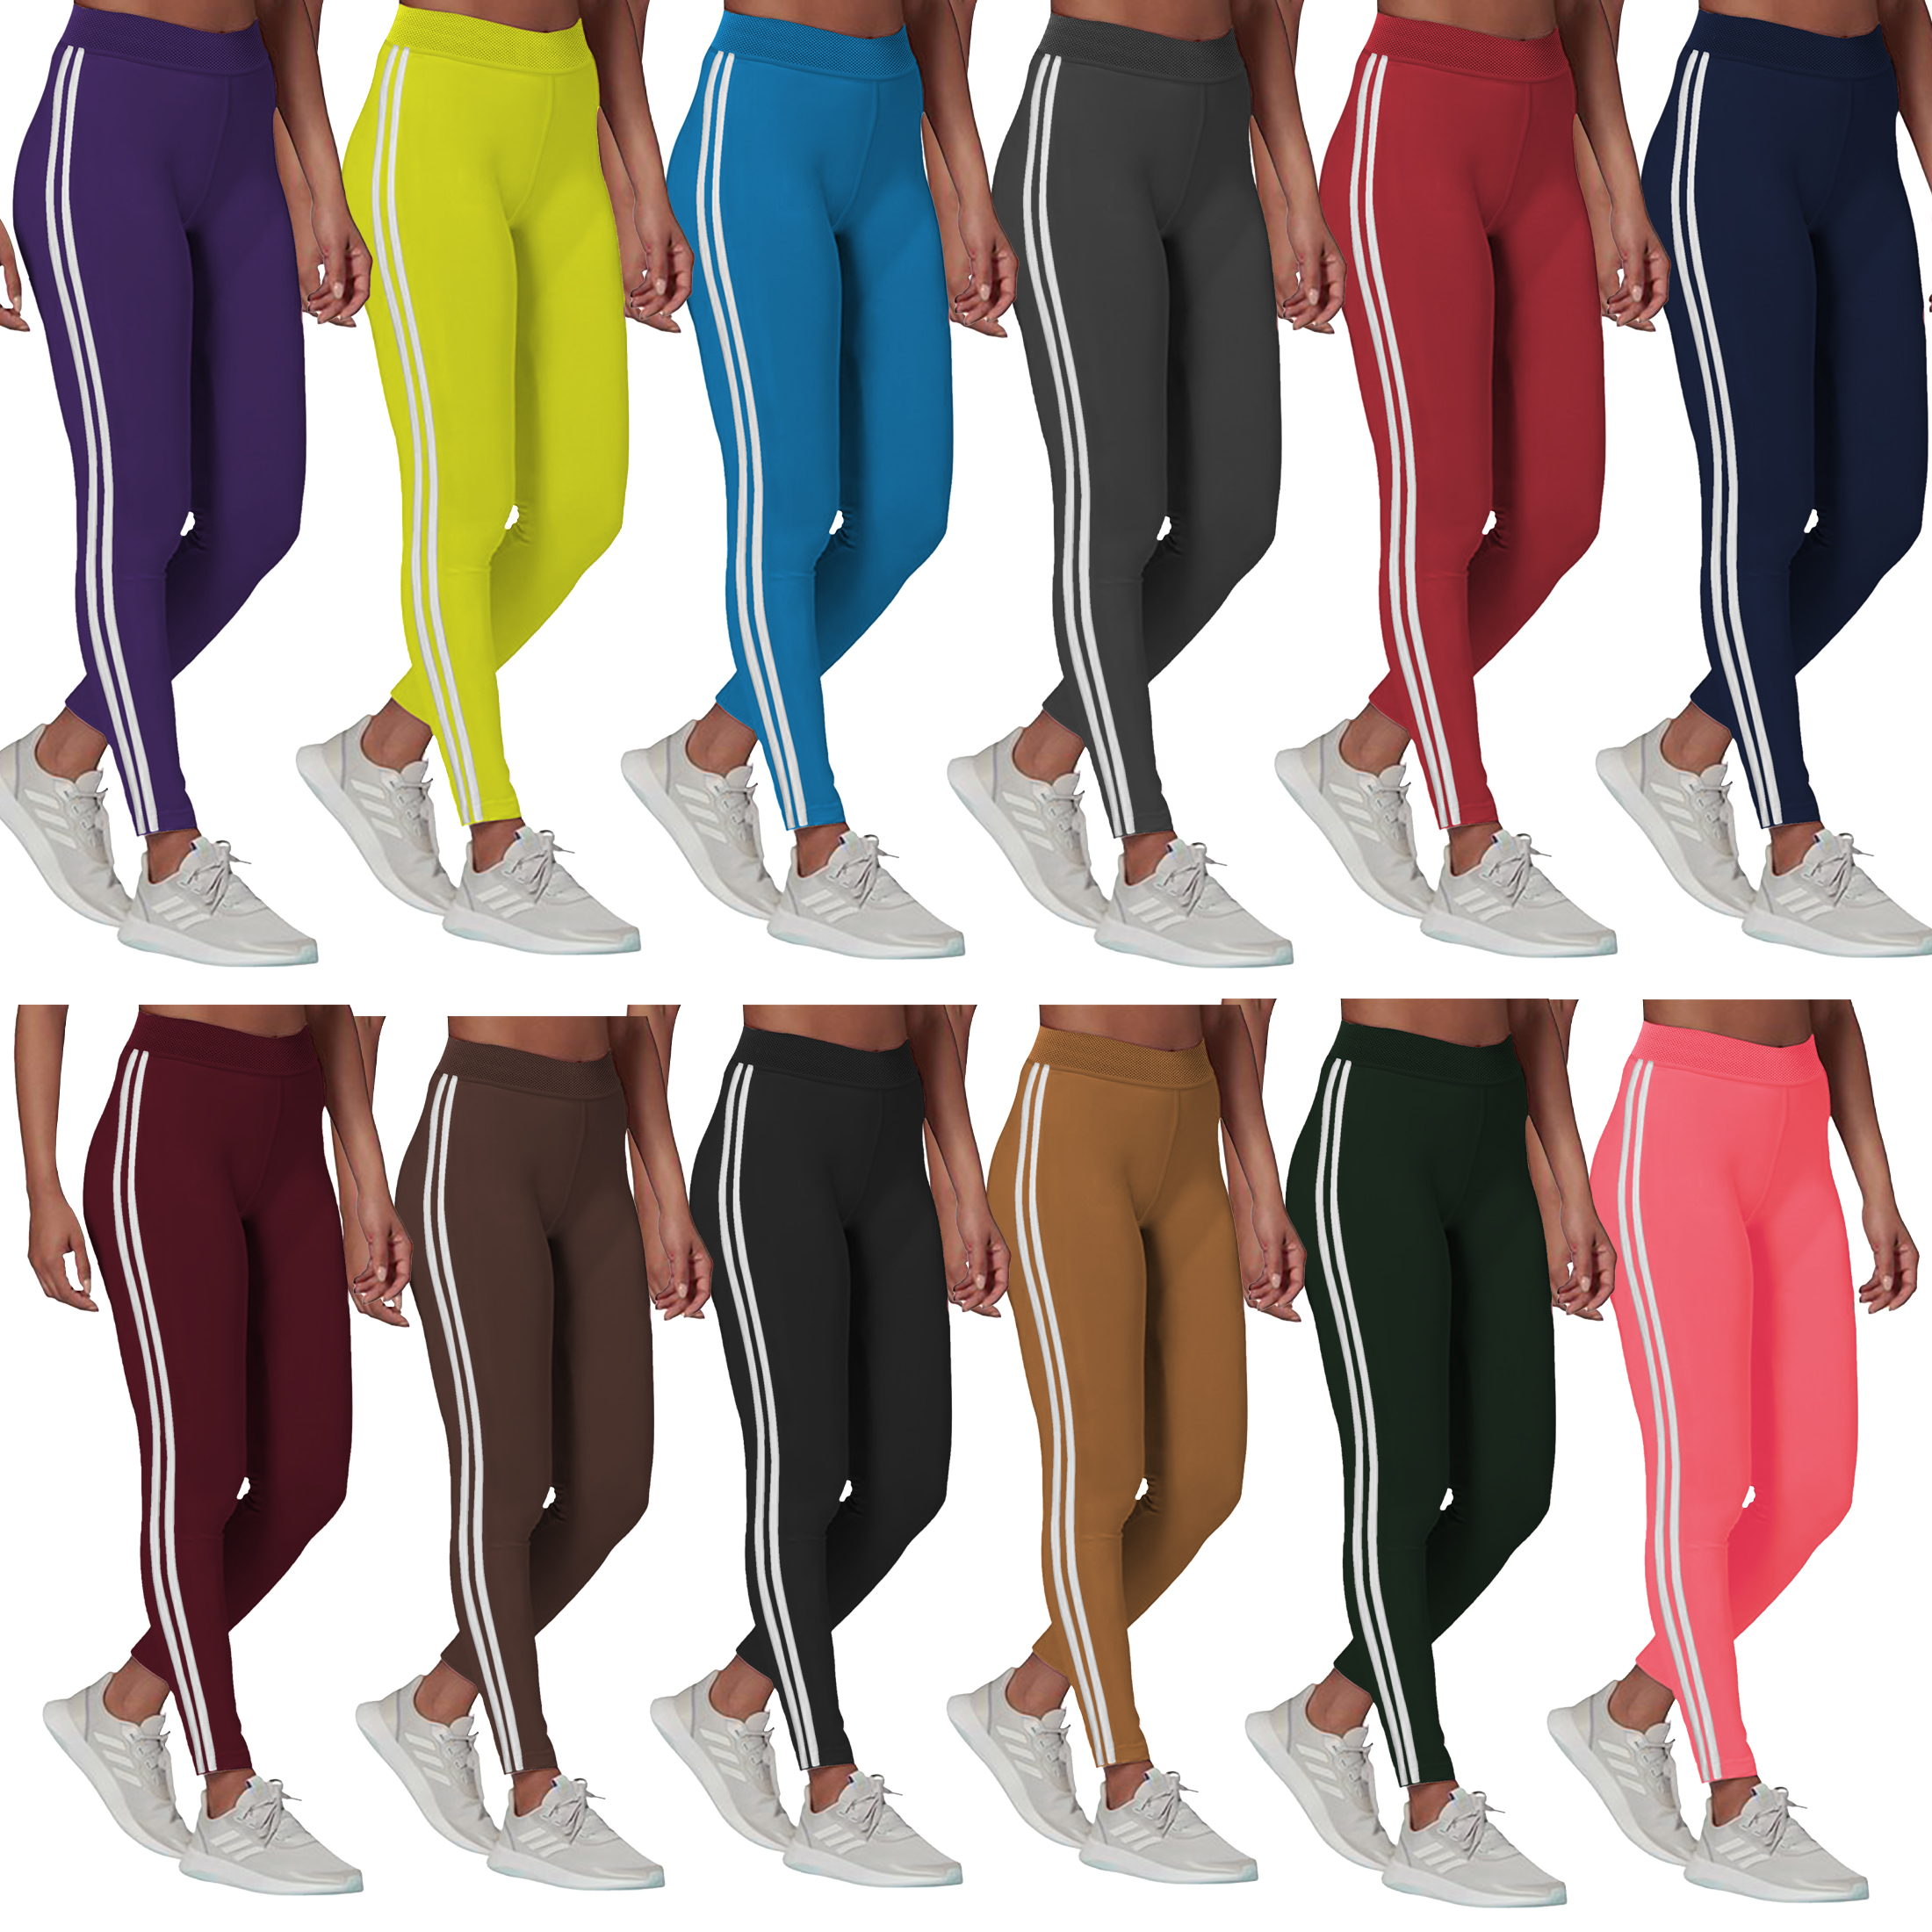 3-Pack: Women's Striped Fleece-Lined High Waisted Workout Yoga Leggings - Large/X-Large